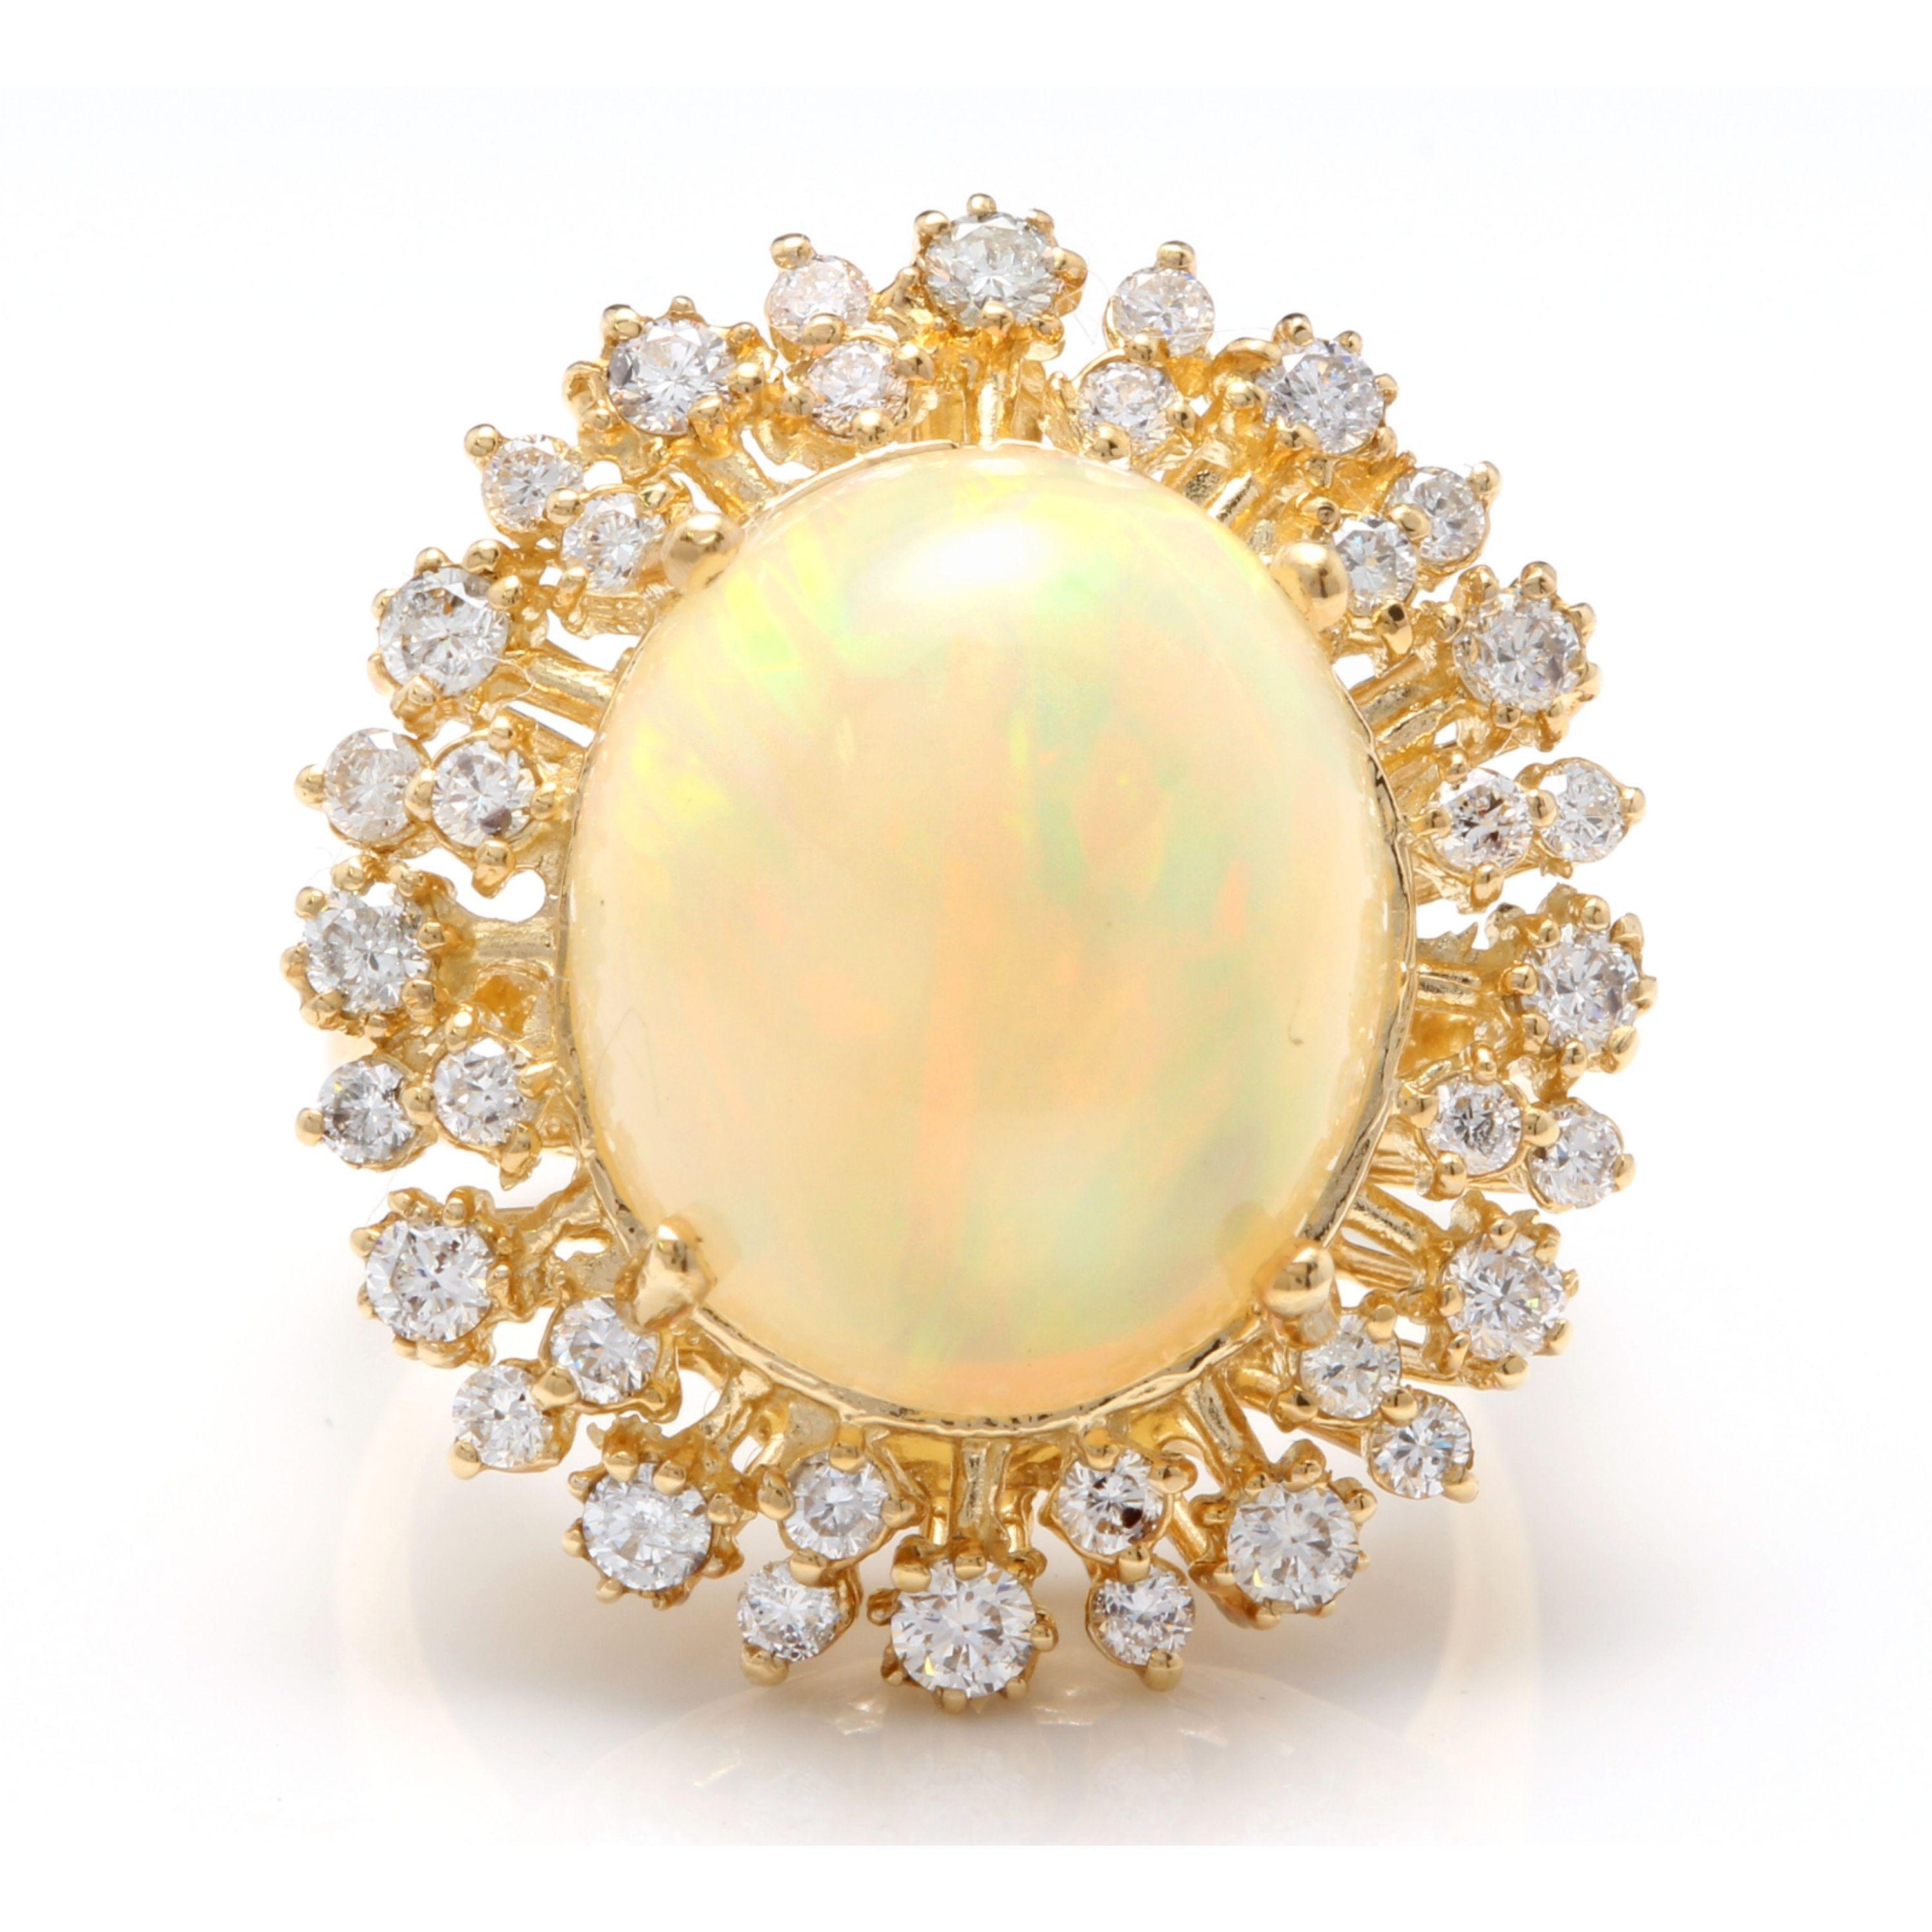 8.65 Carats Natural Impressive Ethiopian Opal and Diamond 14K Solid Yellow Gold Ring

Total Natural Opal Weight is: Approx. 7.35 Carats

Opal Measures: Approx. 15.00 x 12.50mm

The head of the ring measures: Approx. 24.00 x 21.00mm

Total Natural